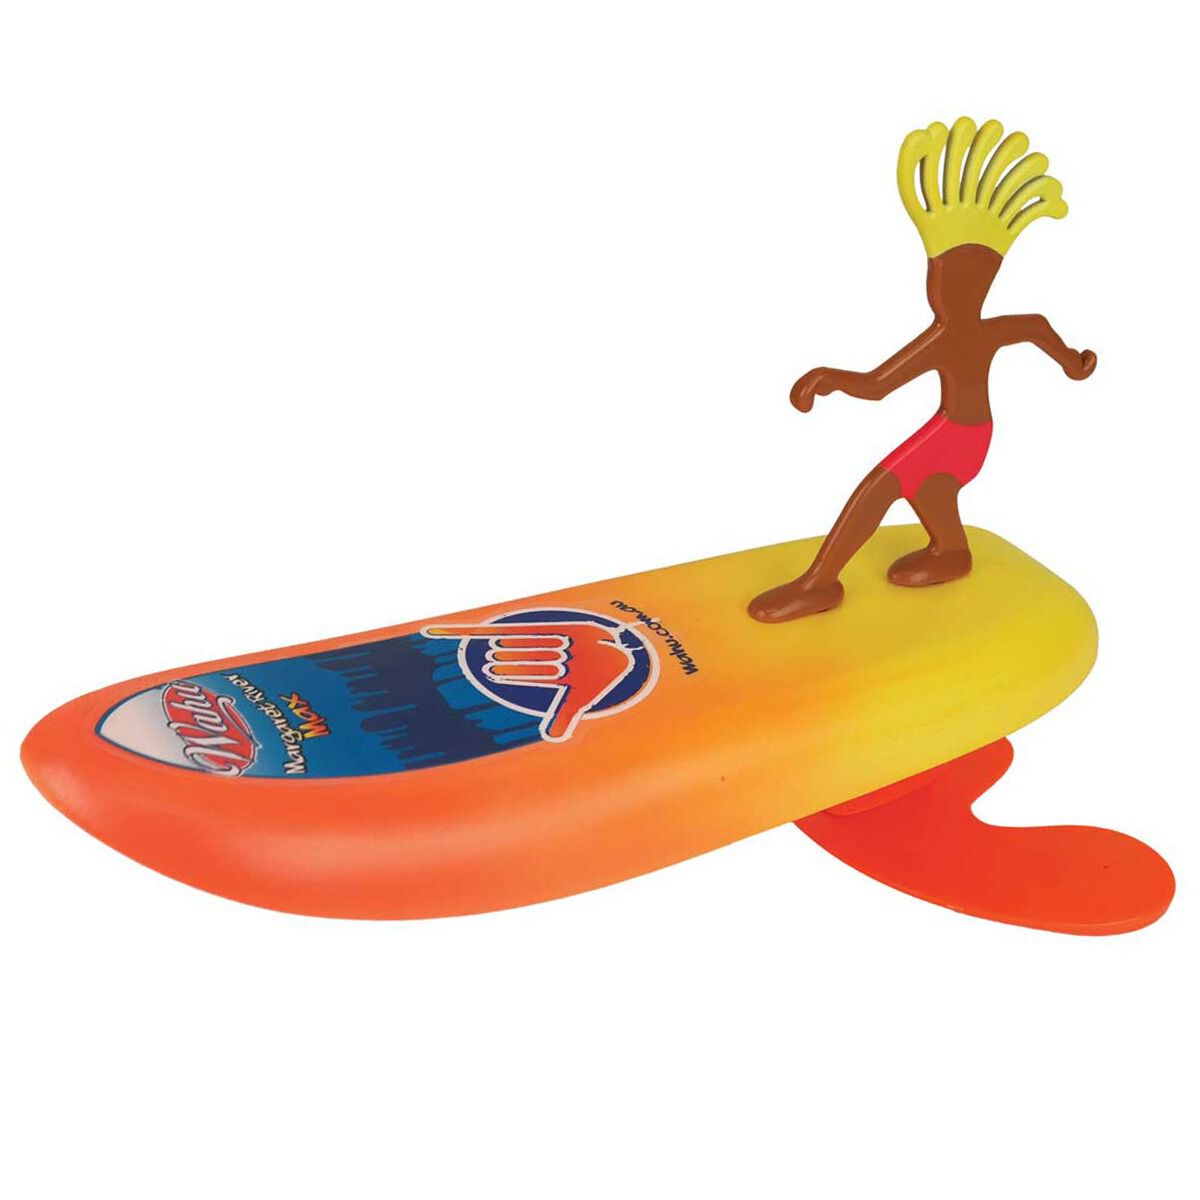 Wahu Surfer Dudes Toy Surfboard 